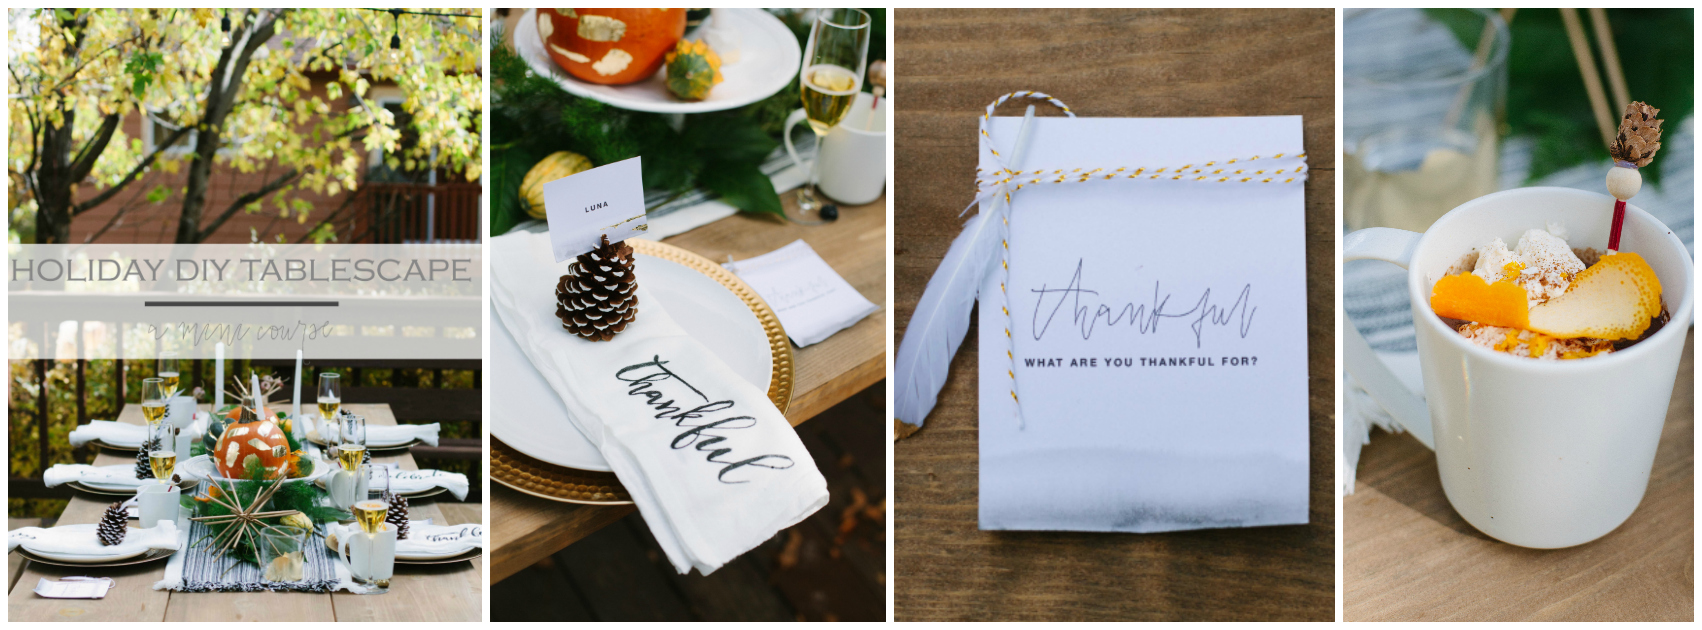 Holiday DIY Tablescape | Rooms FOR Rent Blog